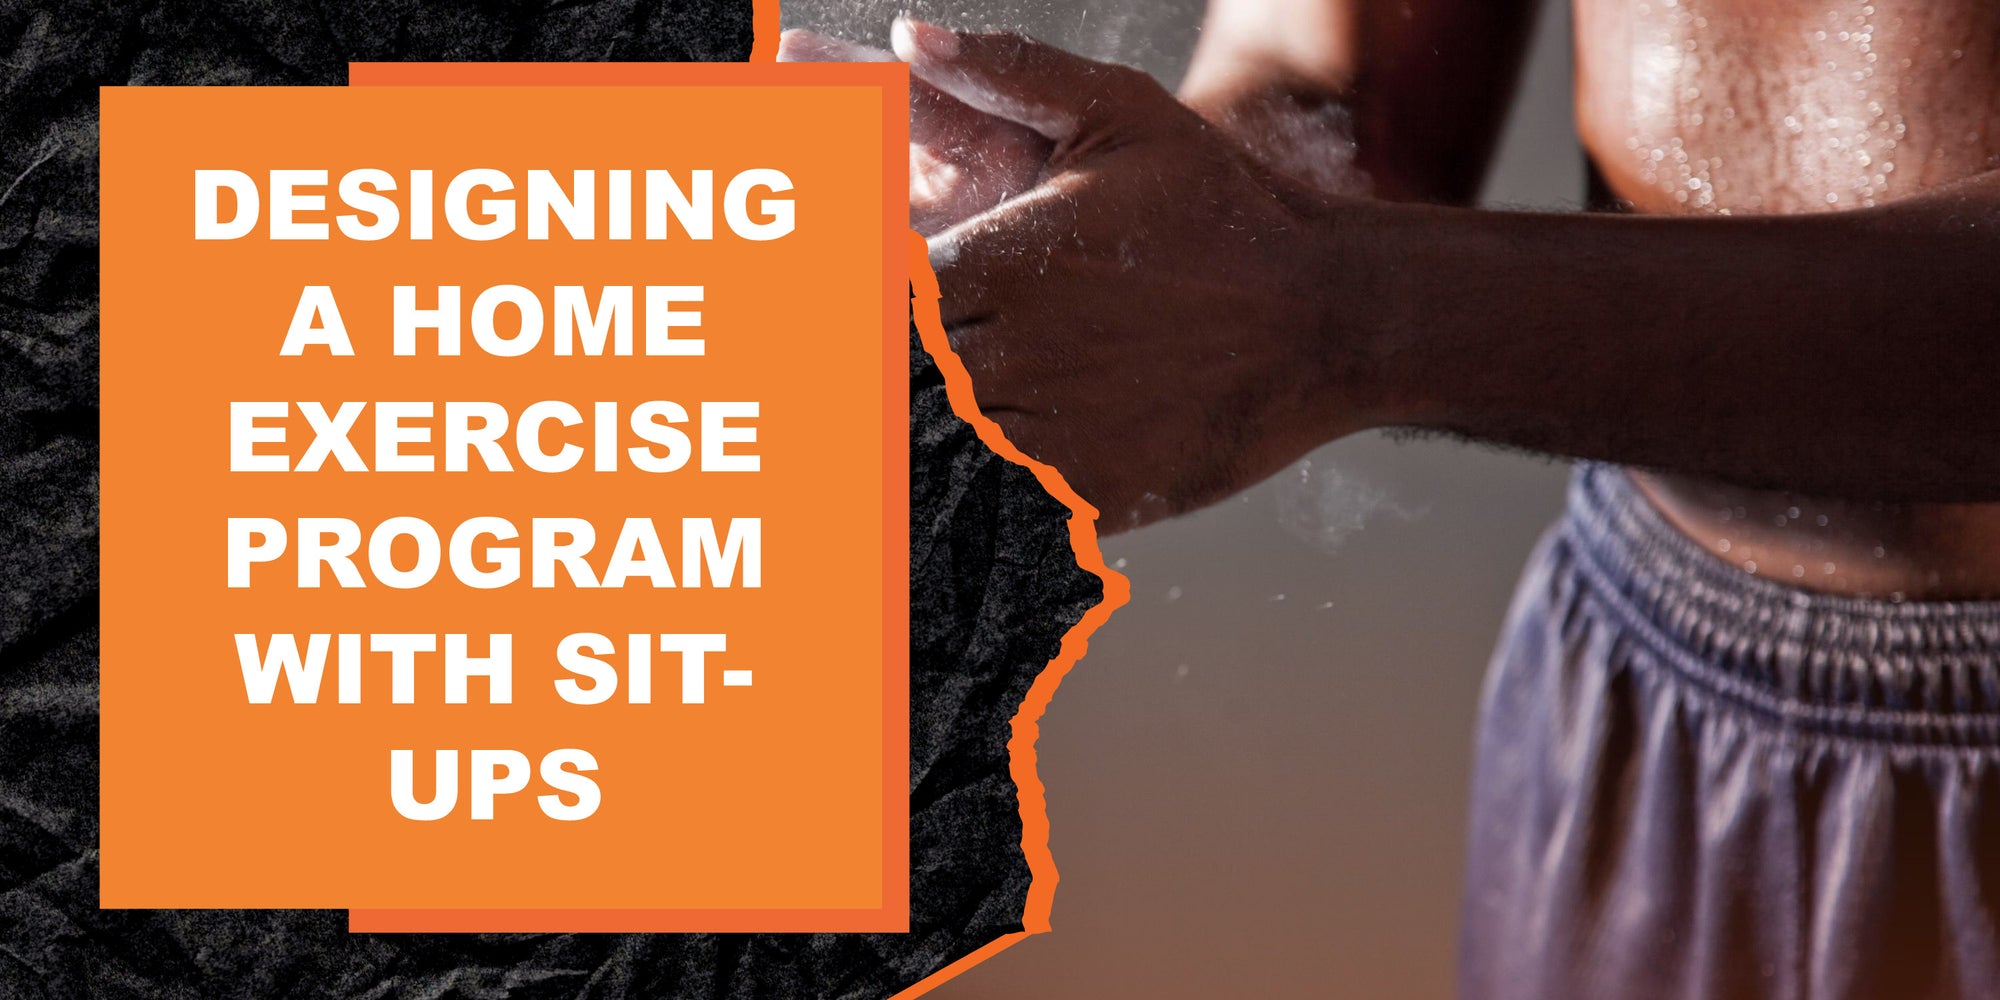 Designing a Home Exercise Program with Sit-Ups